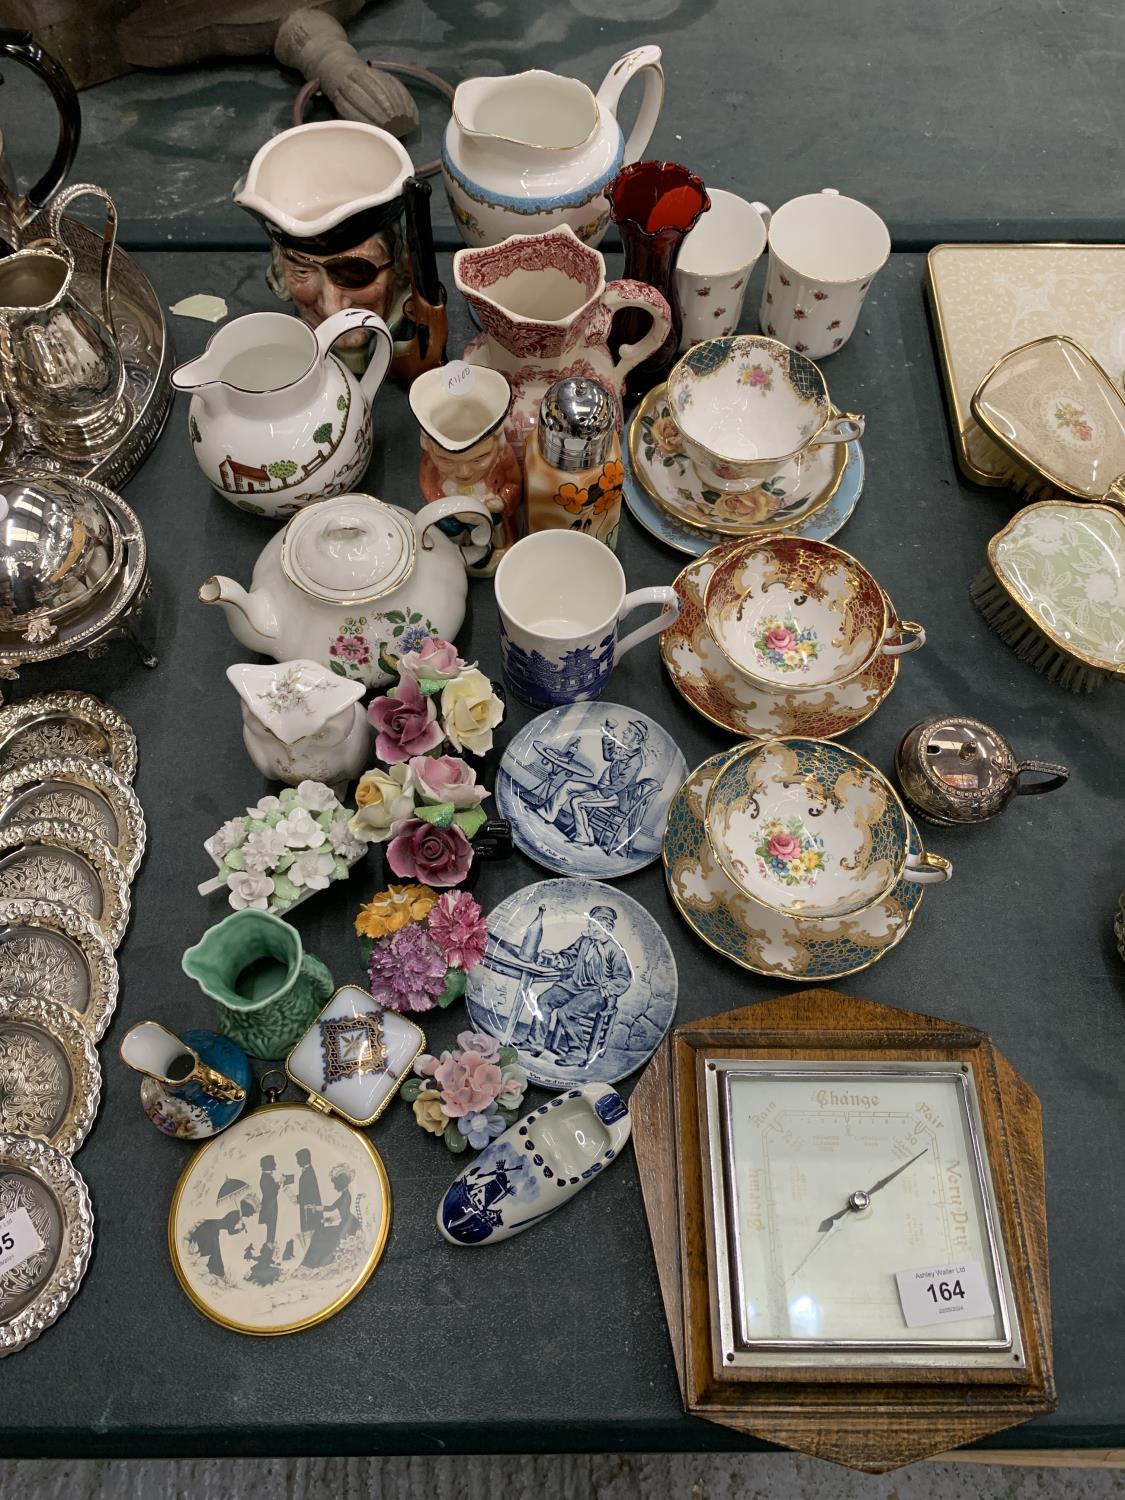 A LARGE QUANTITY OF CERAMIC AND CHINA TO INCLUDE PARAGON CUPS AND SAUCERS, FLORAL POSIES, CROWN